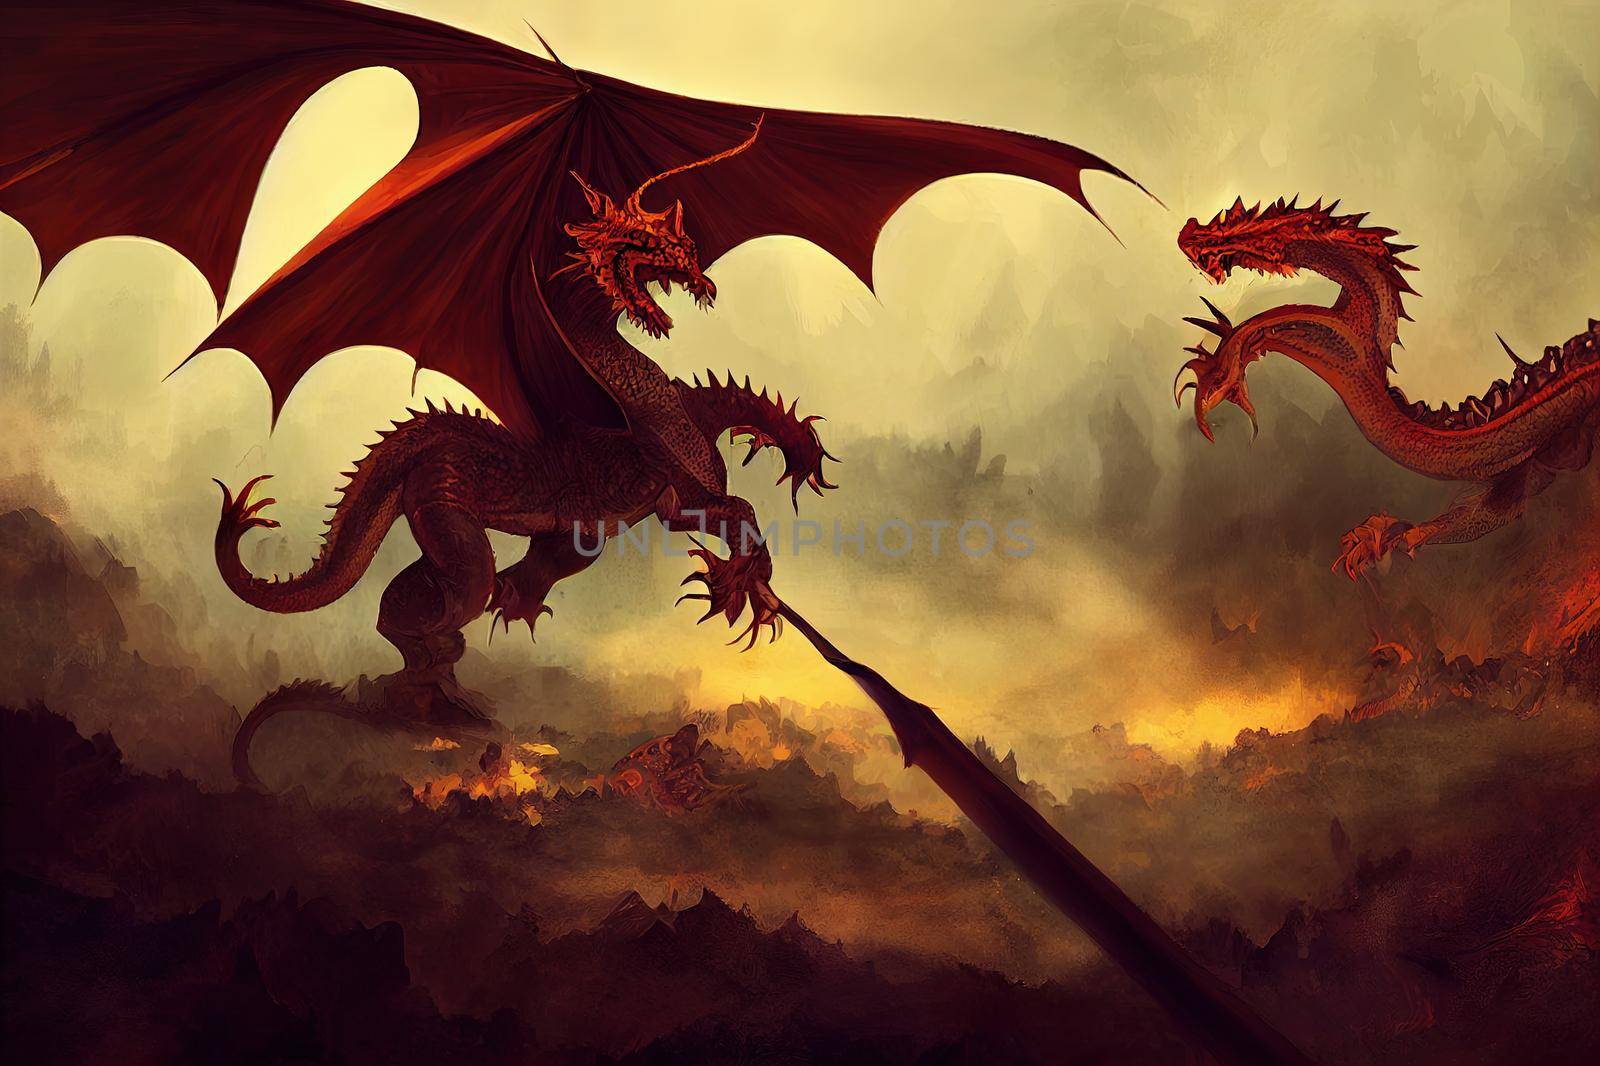 The heroic warrior bravely faced the dragon, digital painting. by 2ragon